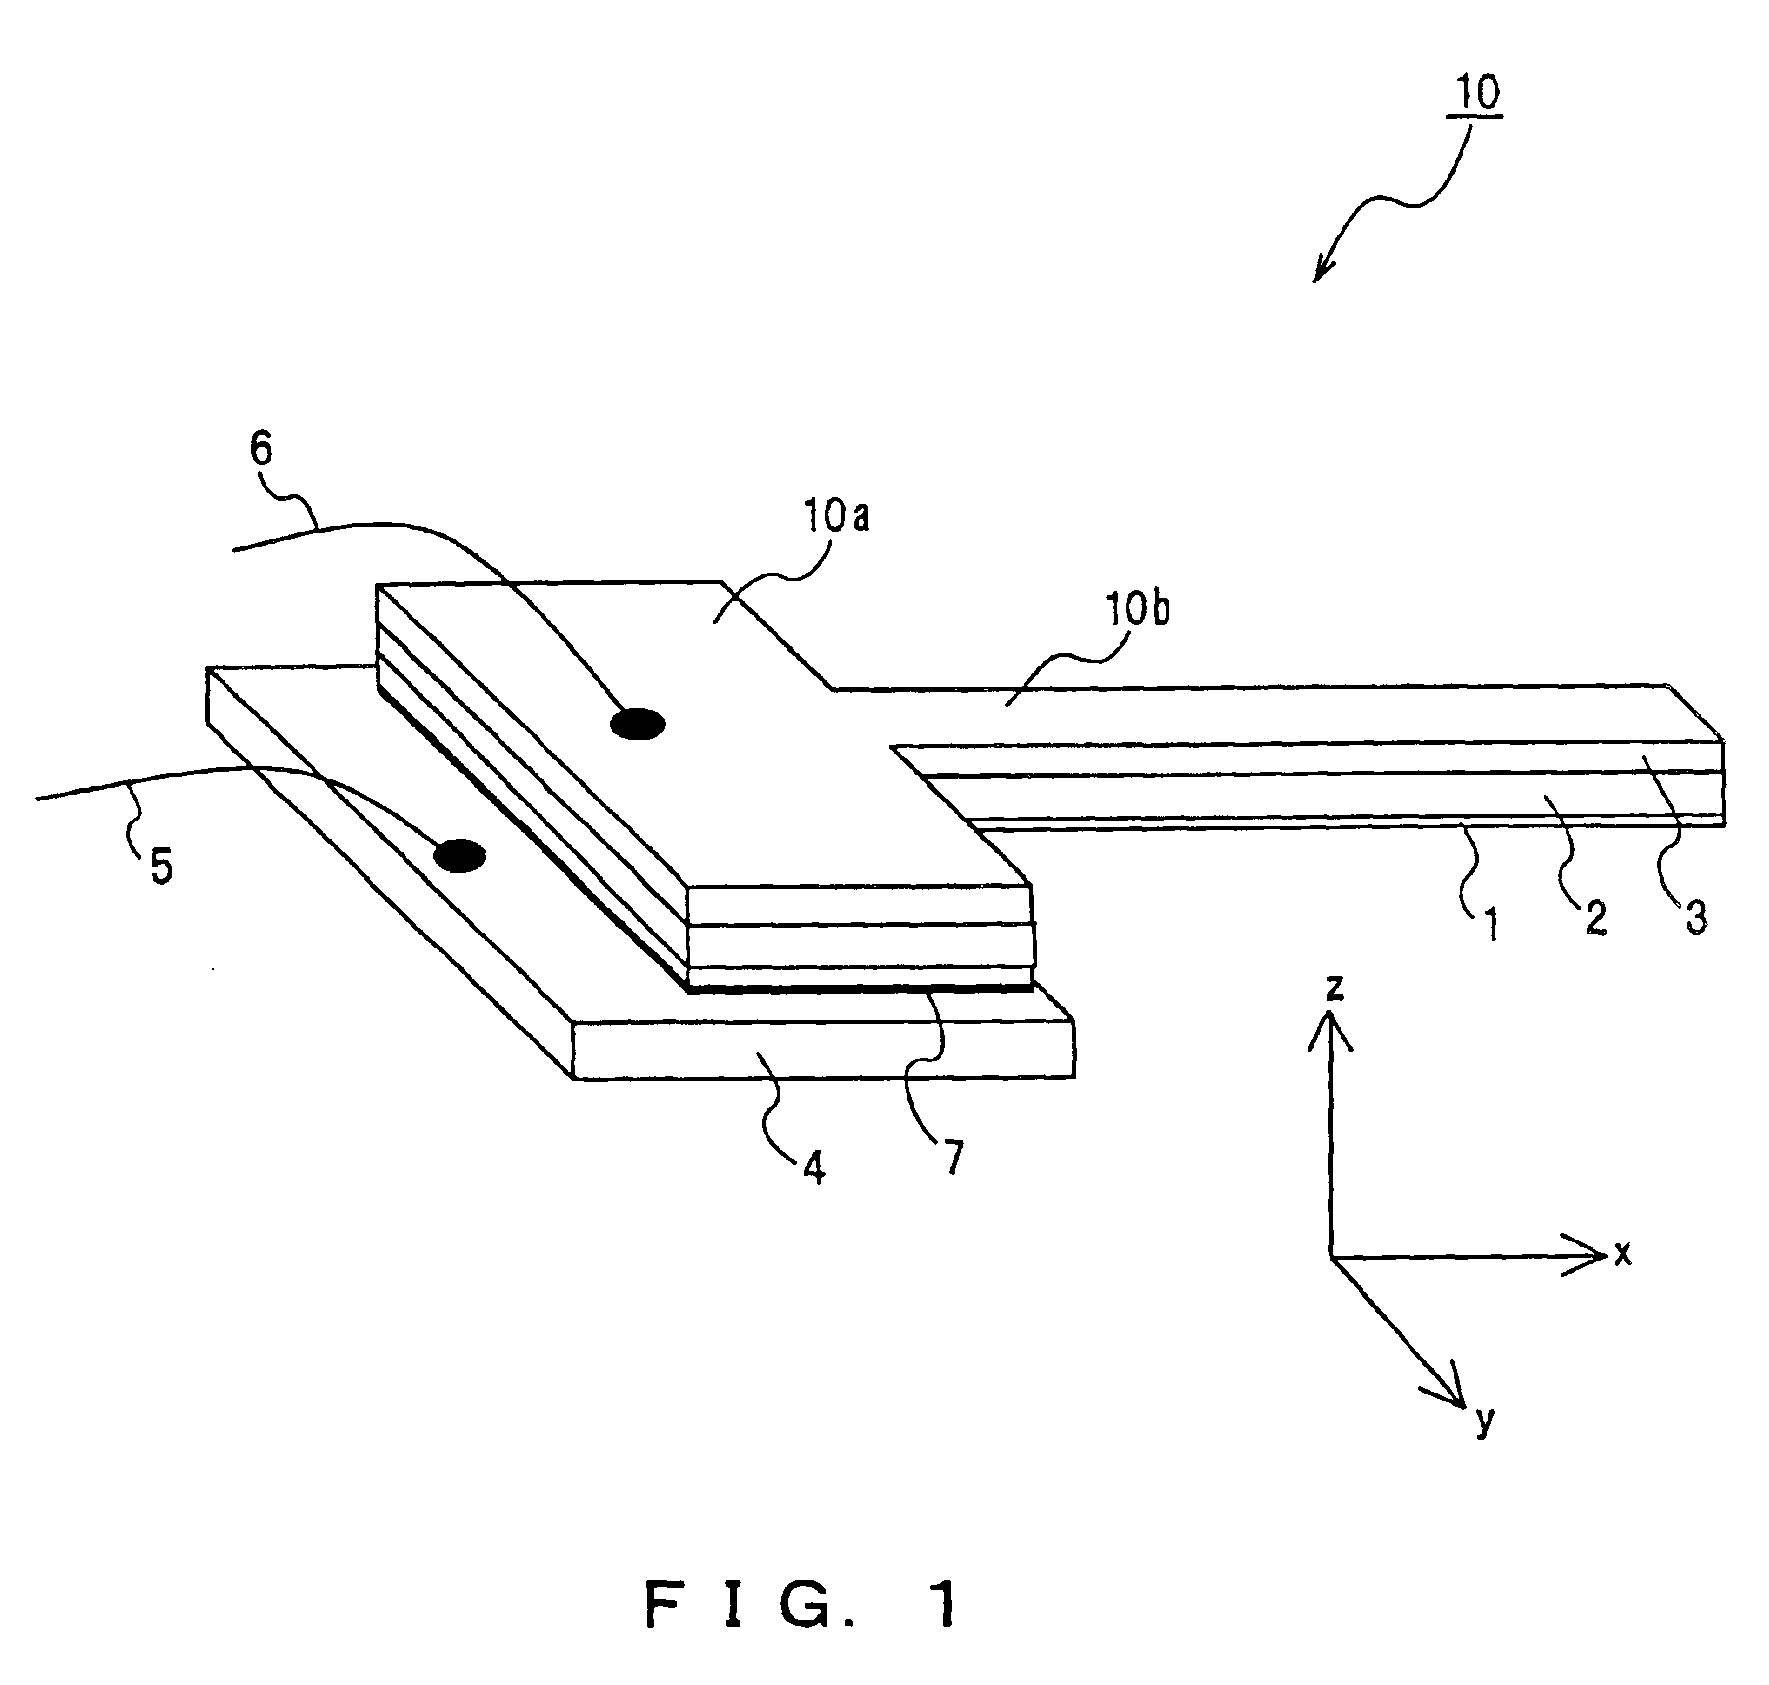 Piezoelectric thin film and method for preparation theof, and piezoelectric element having the piezoelectric thin film, ink-jet head using the piezoelectric element, and ink-jet recording device having the ink-jet head